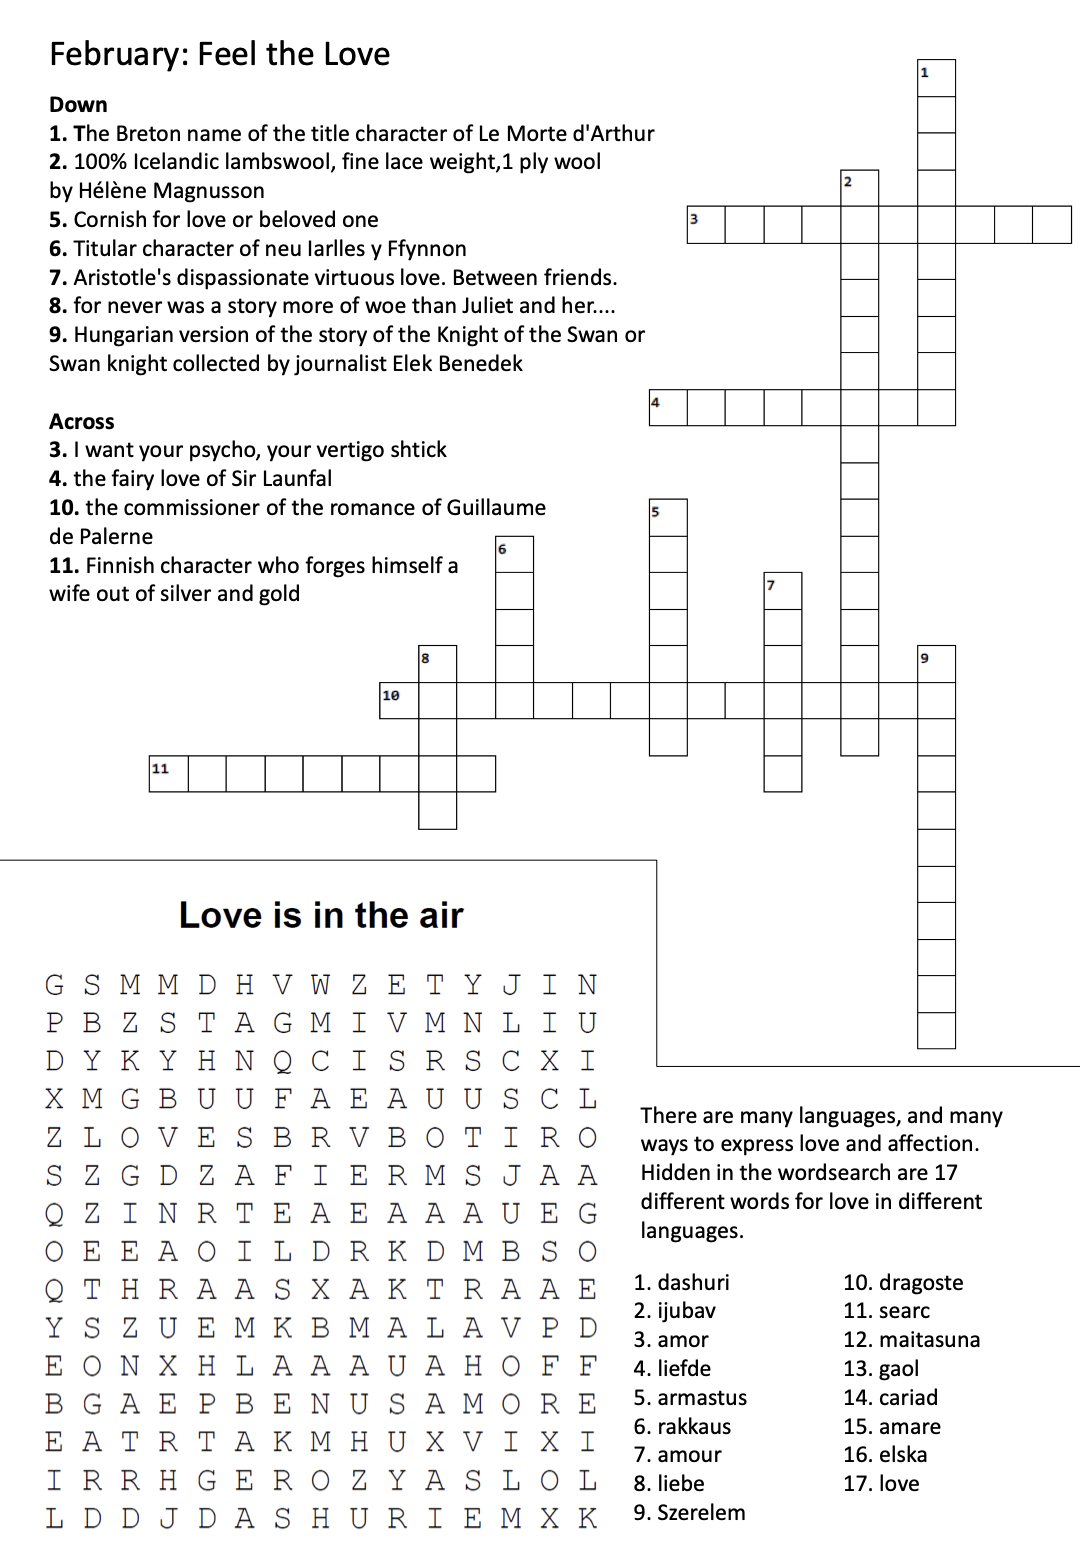 Crossword and word search